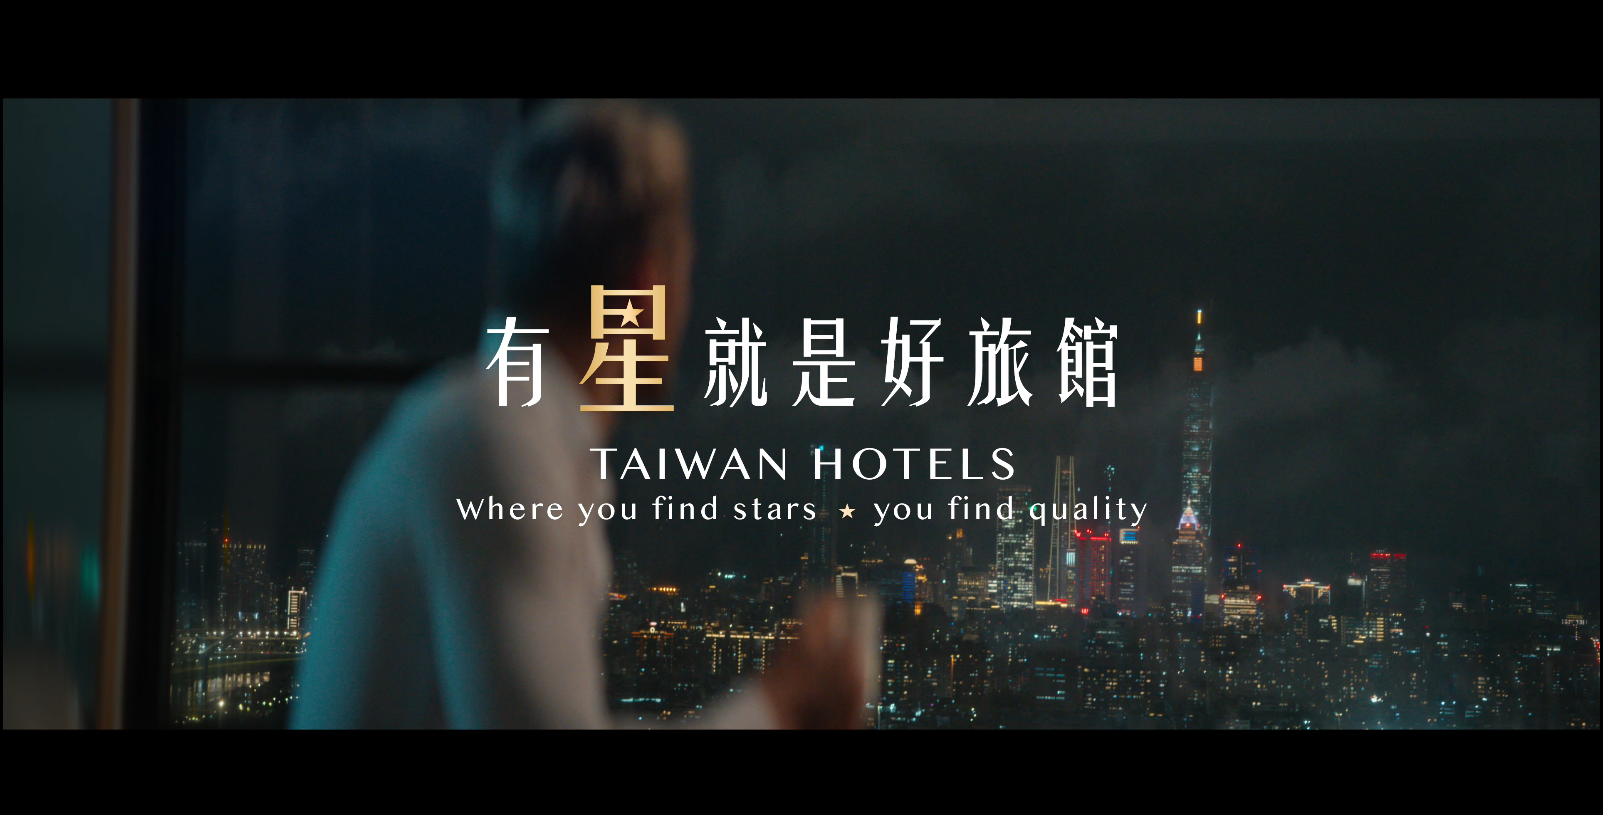  TAIWAN HOTELS - Where you find stars, you find quality.(Publicity Film_60s)